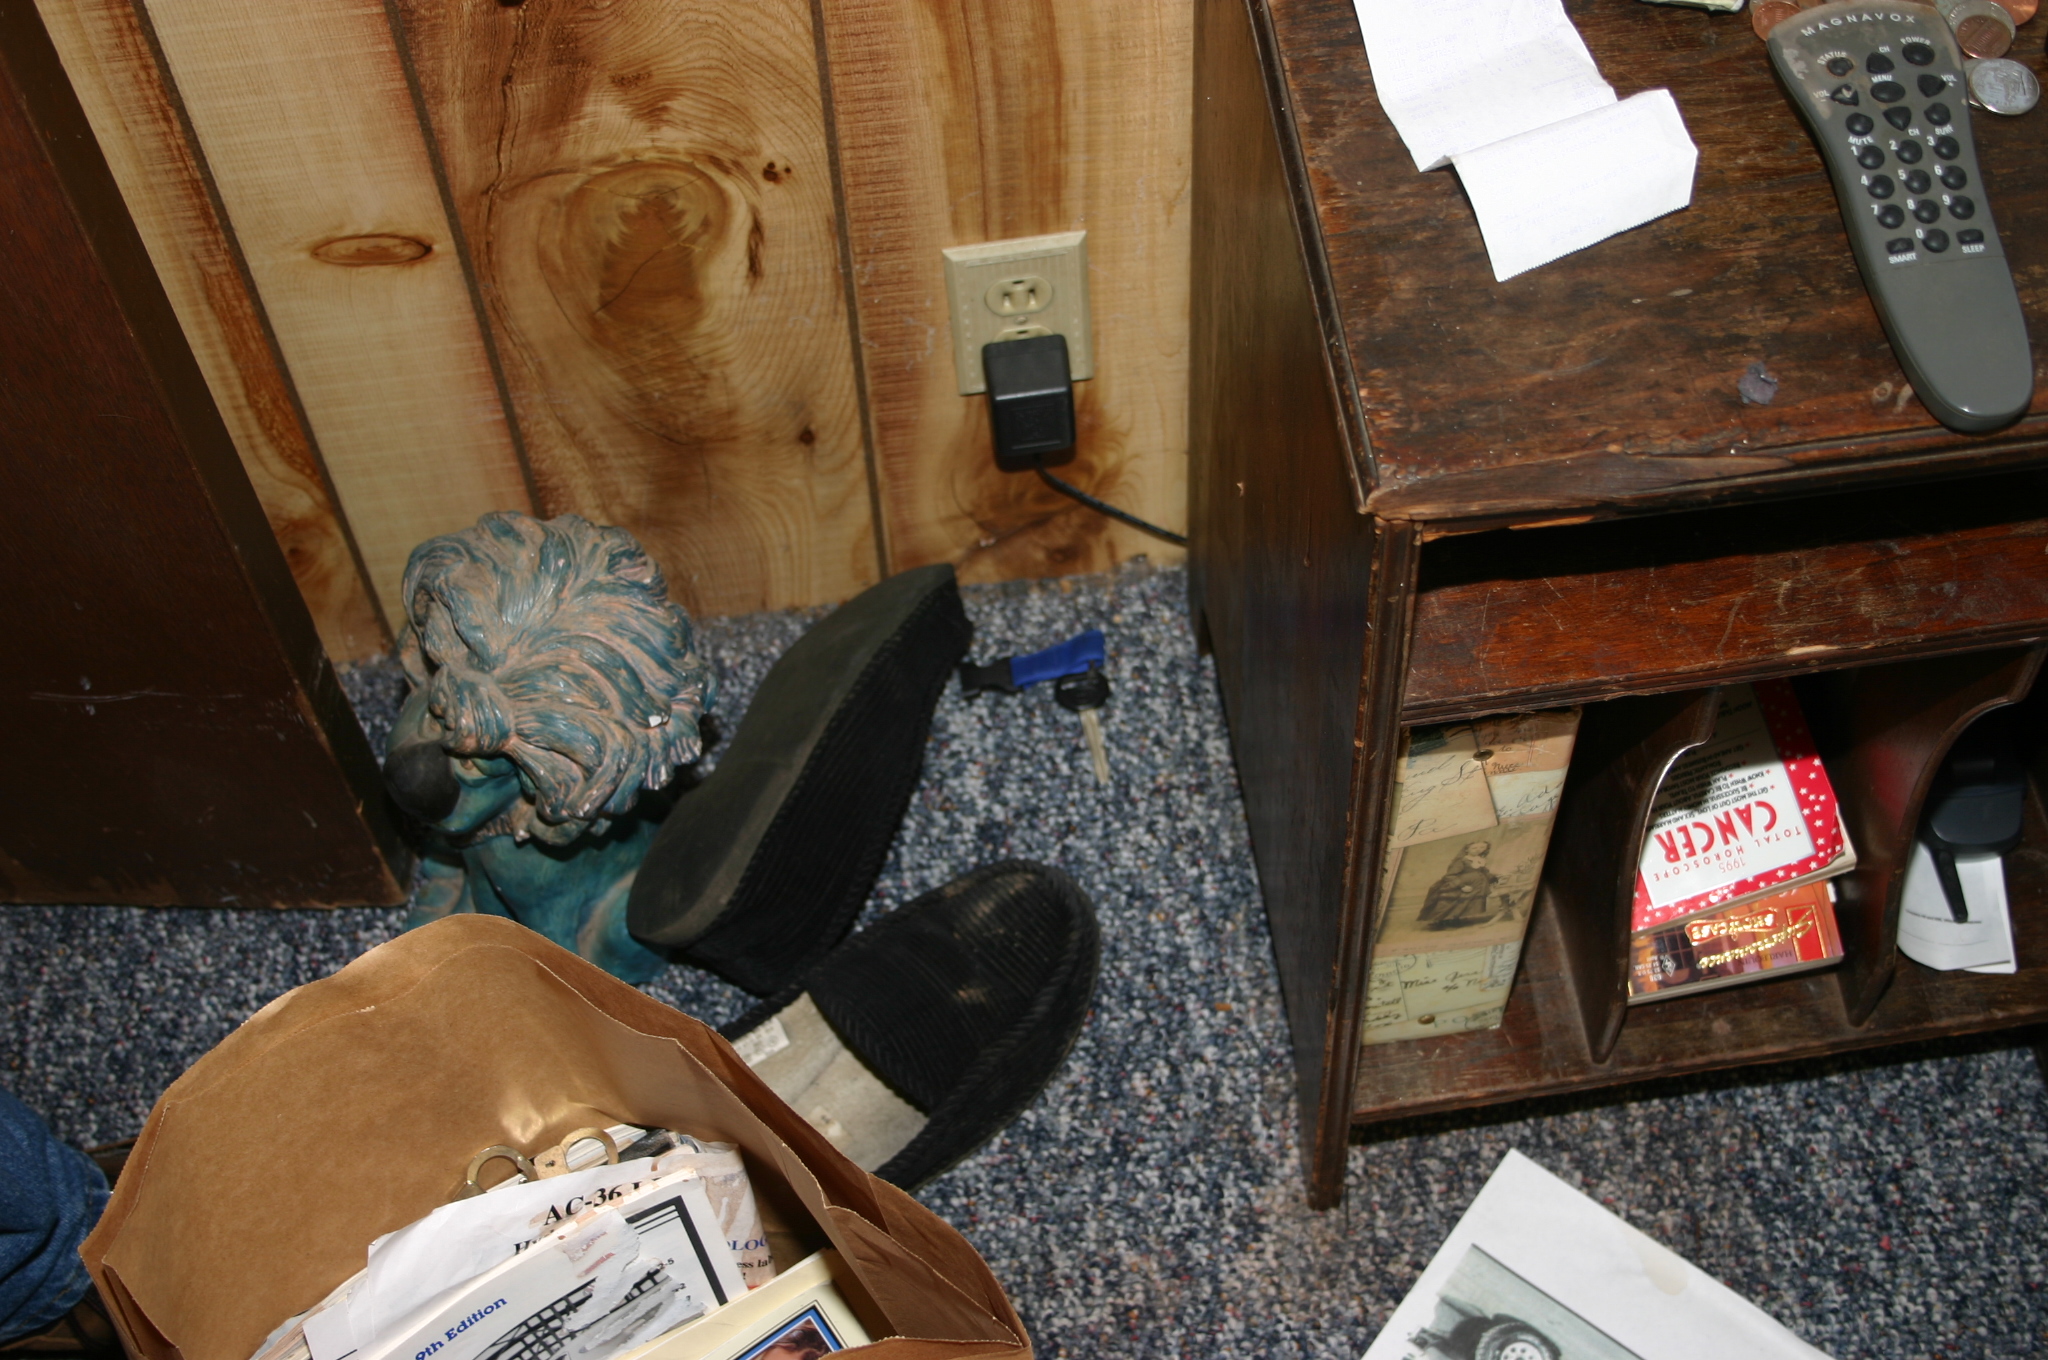 Evidence photo the state presented at Steven Avery's murder trial showing Teresa Halbach's car key inside Avery's trailer.